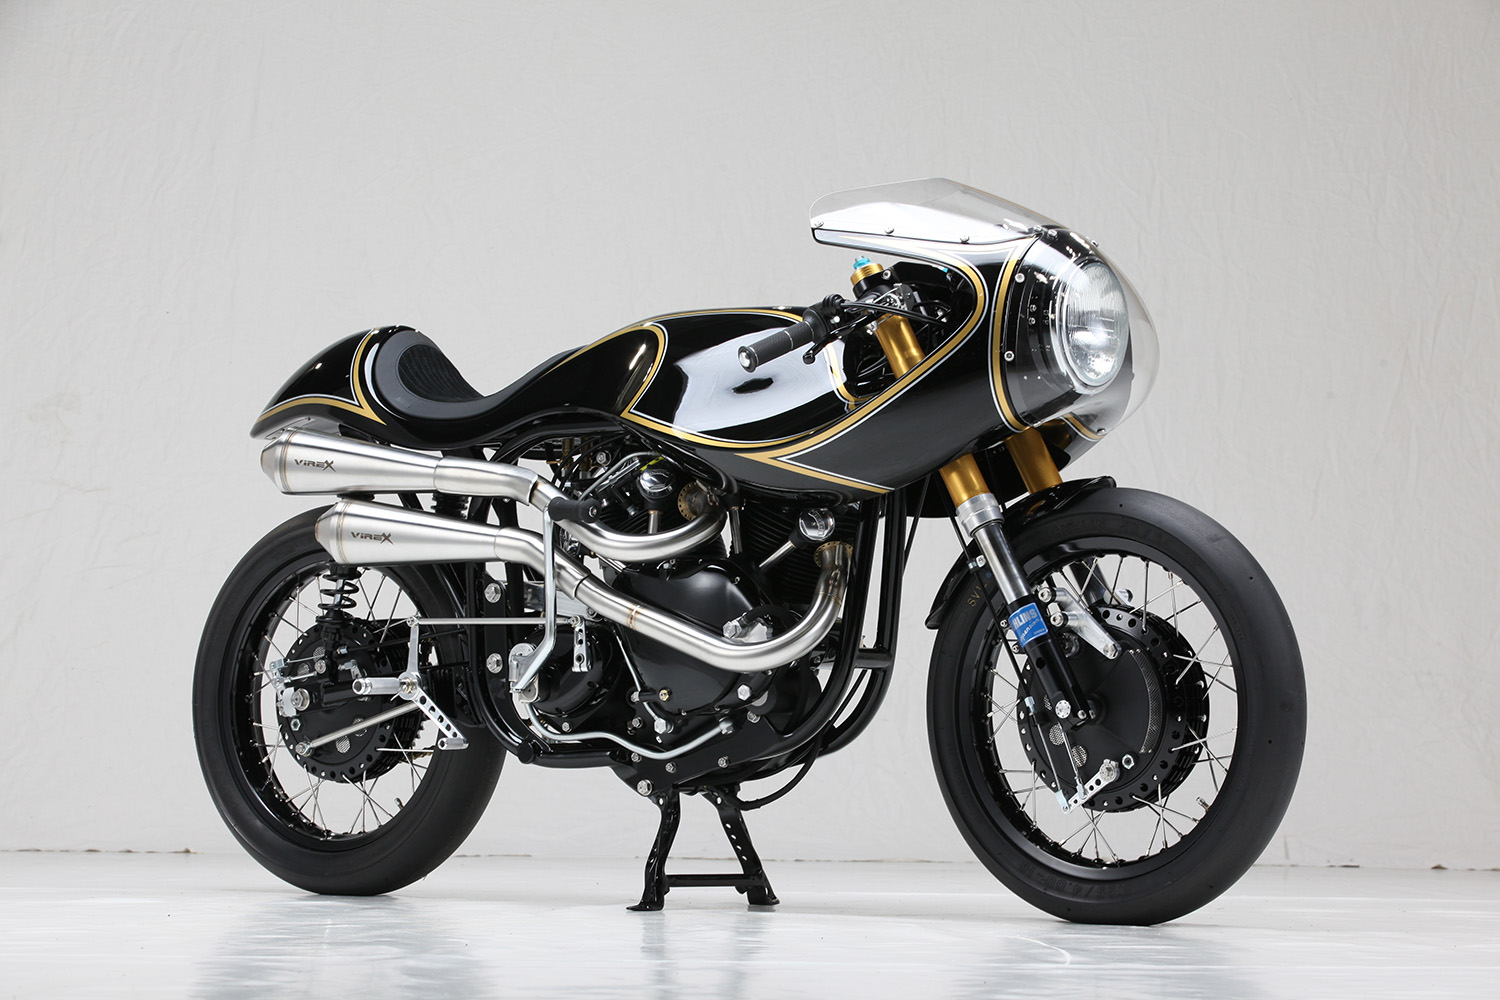 Photographs of beautiful Motorcycles